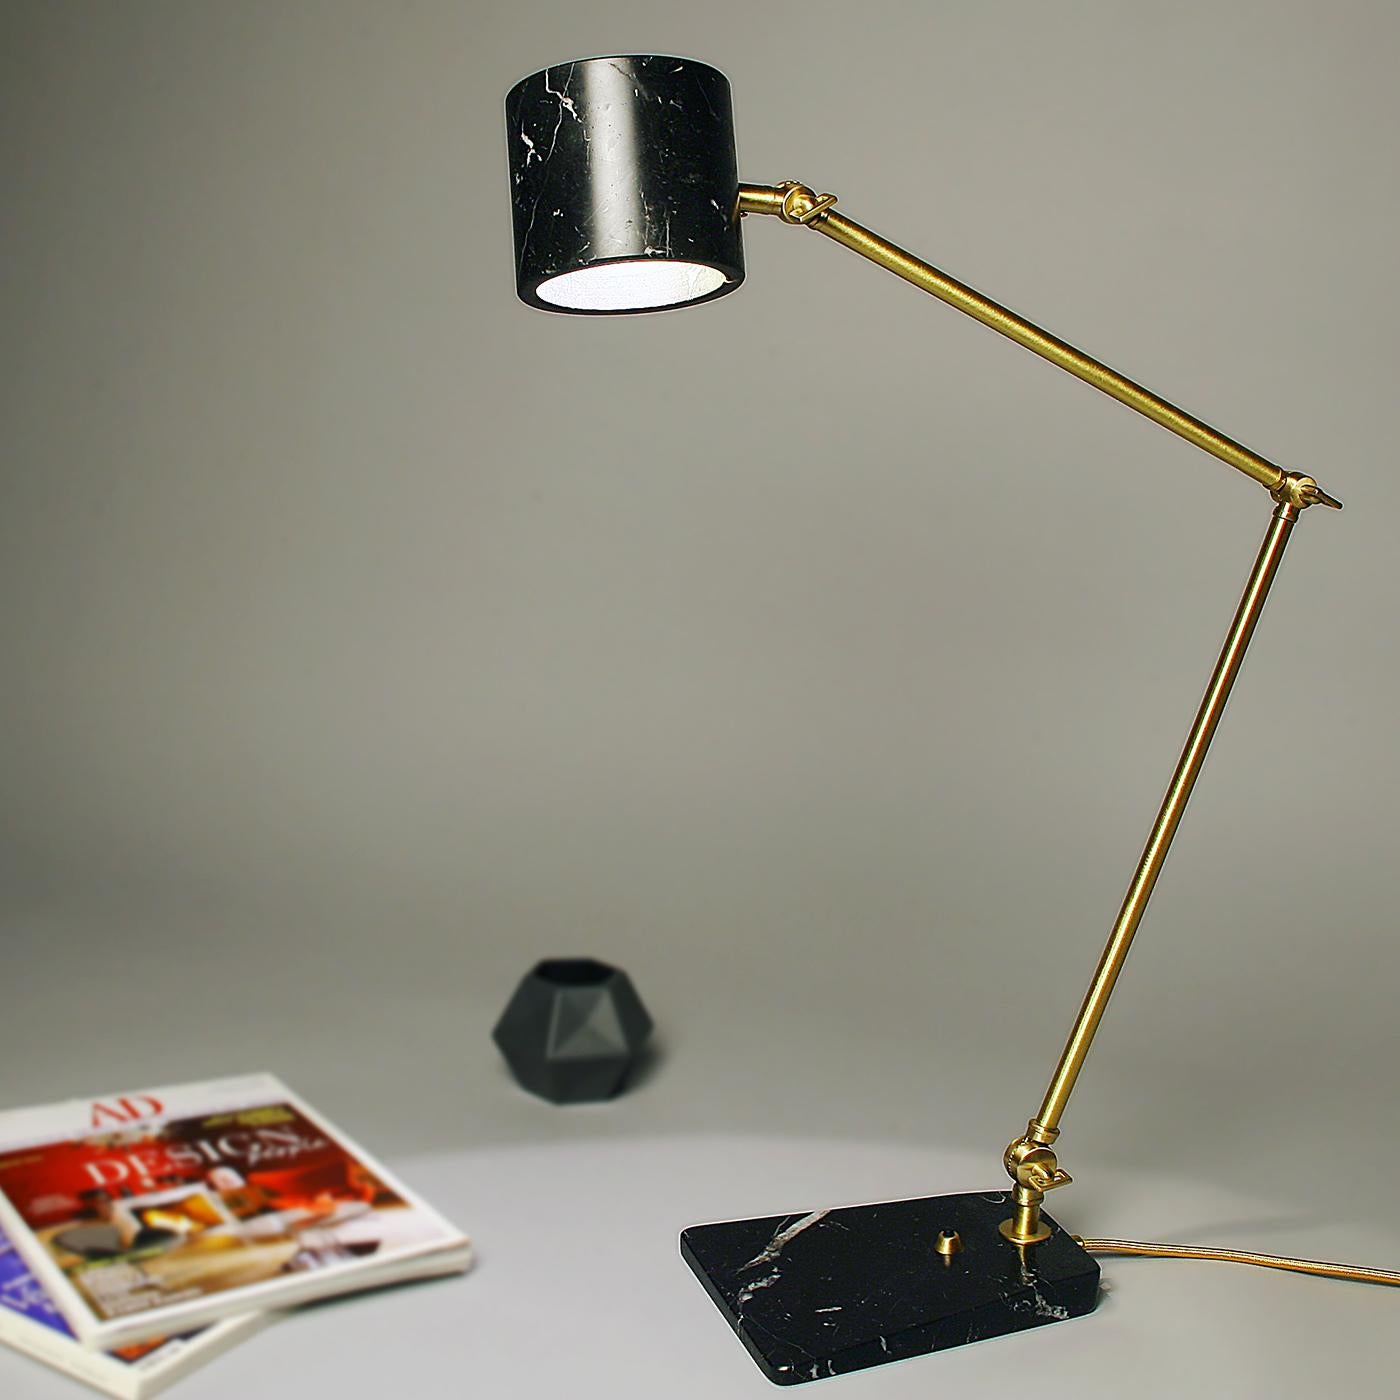 The Flamingo desk lamp is characterized by the contrast between the volumes of its elements: the thinness of the adjustable angle brass stem contrasts with the unusual adjustable marble shade.